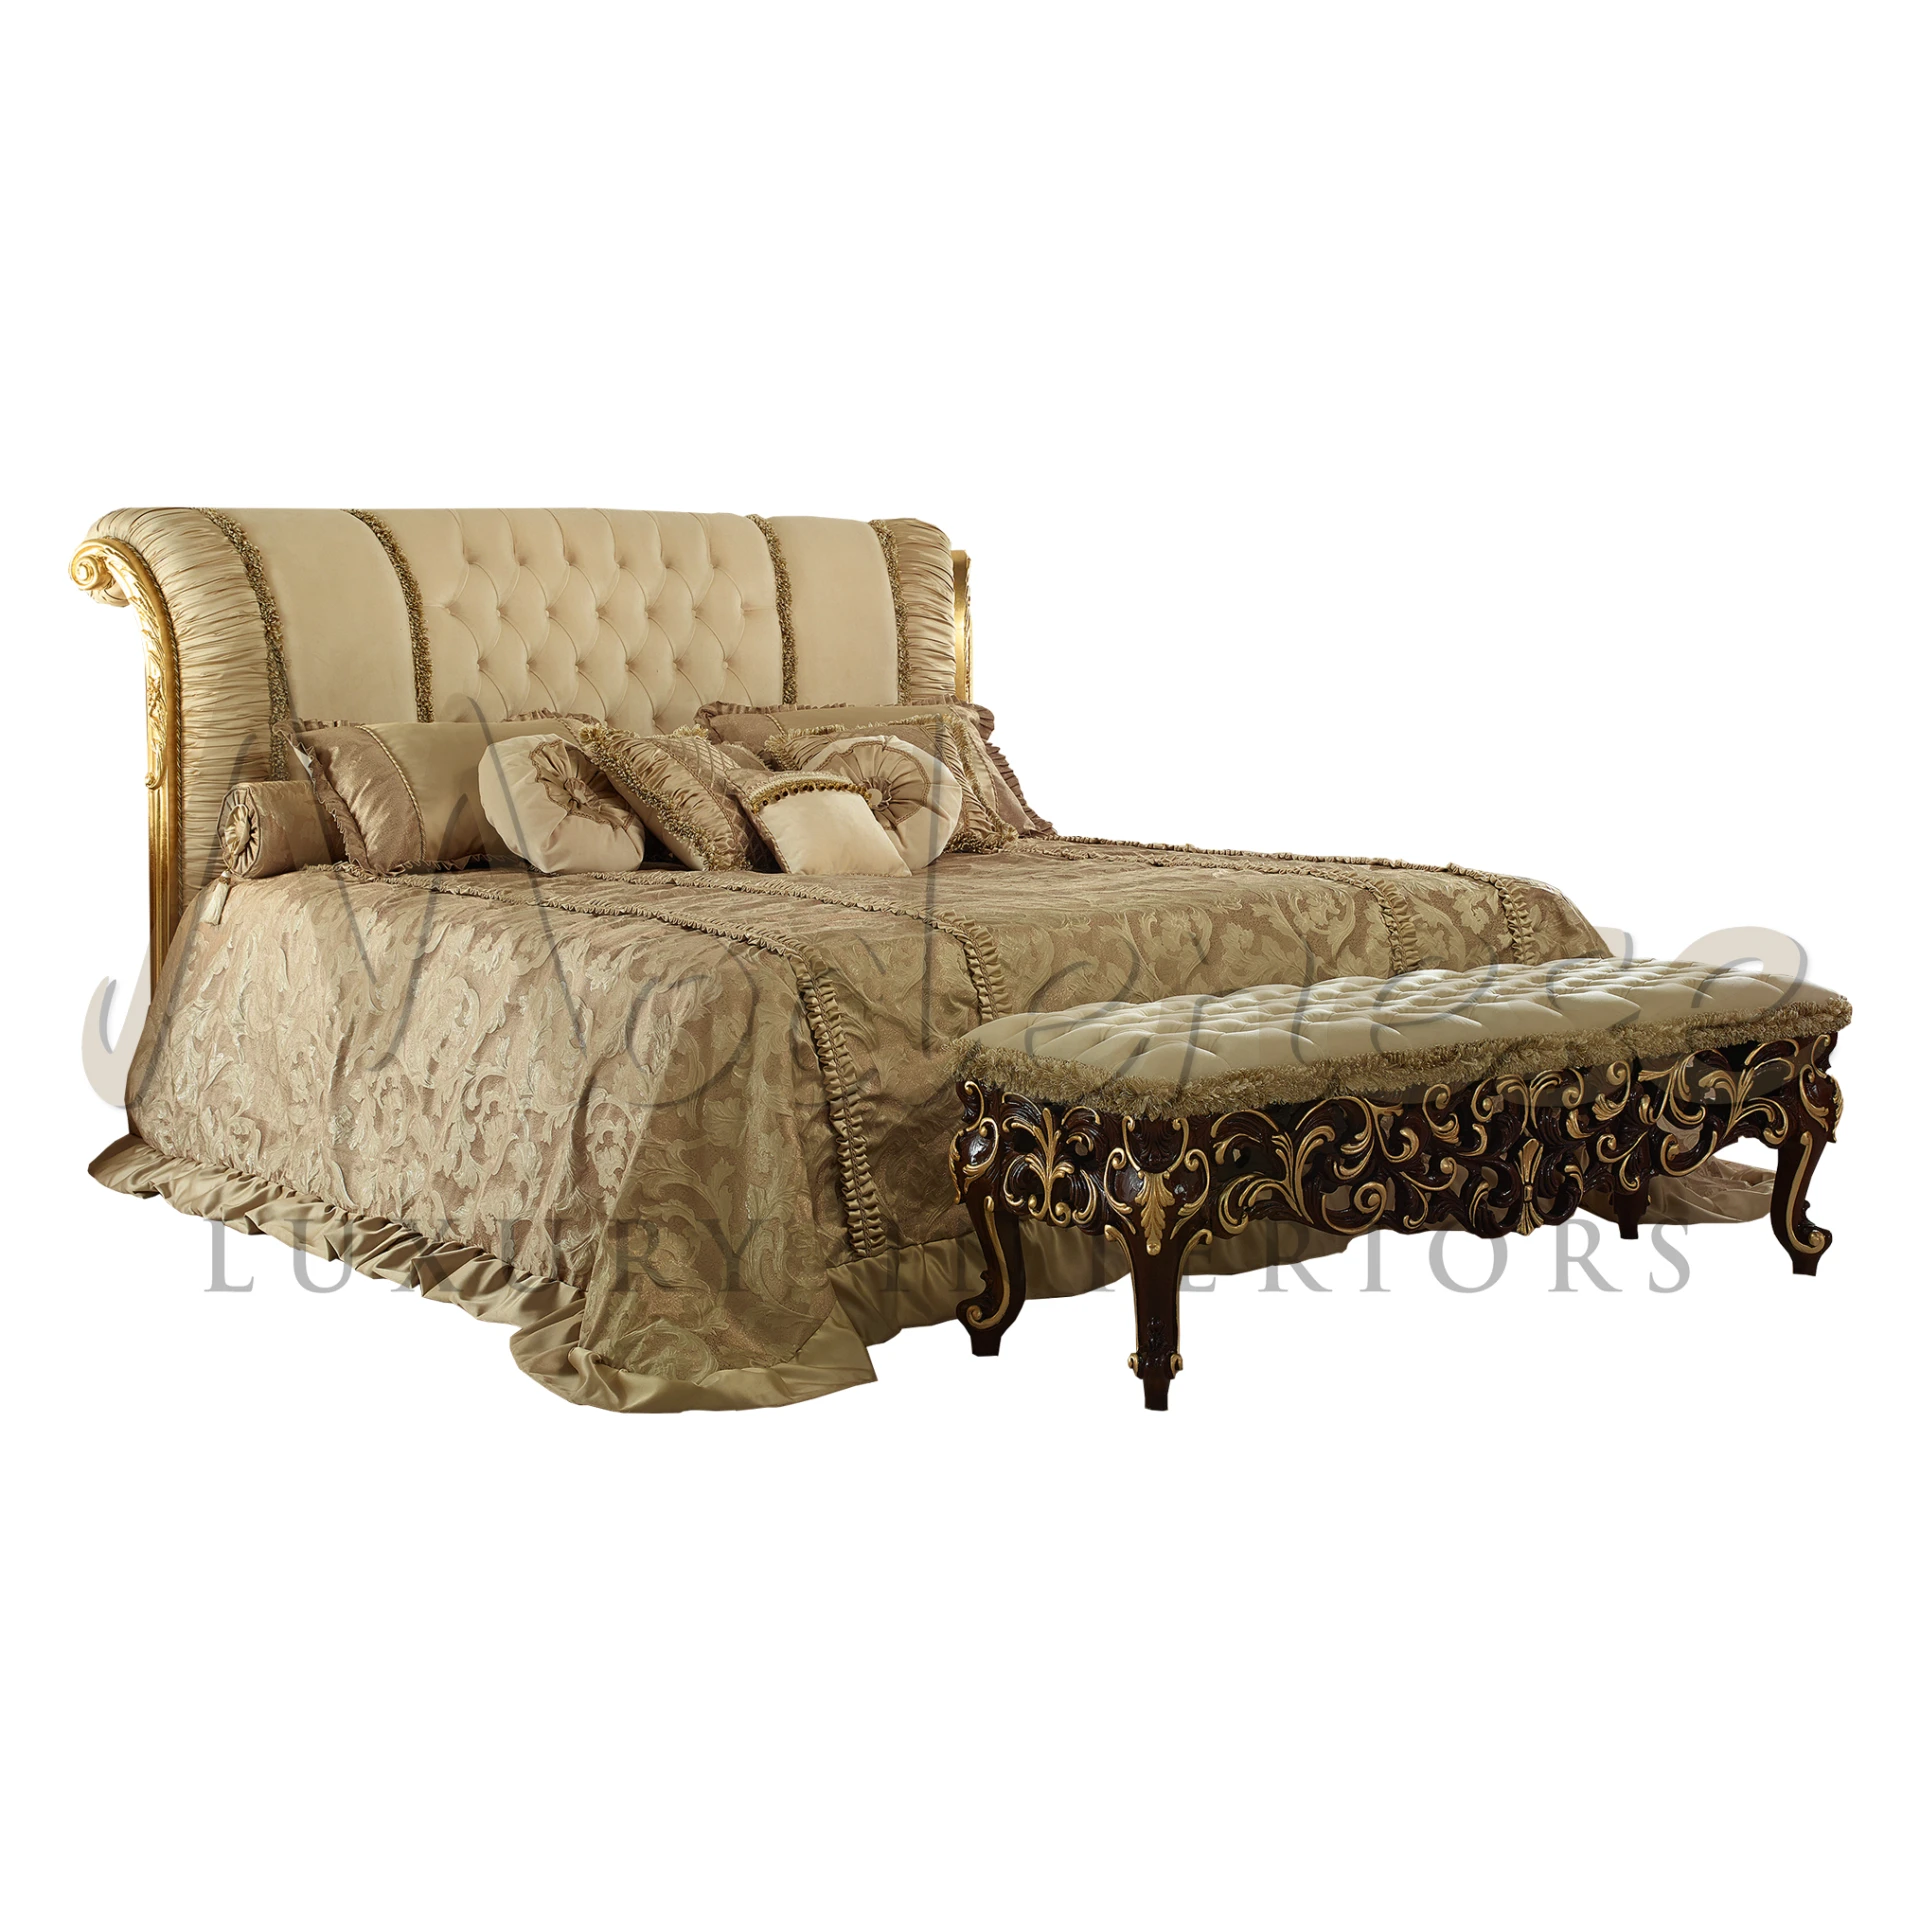 Damask Beige Bed Cover Handmade in Italy